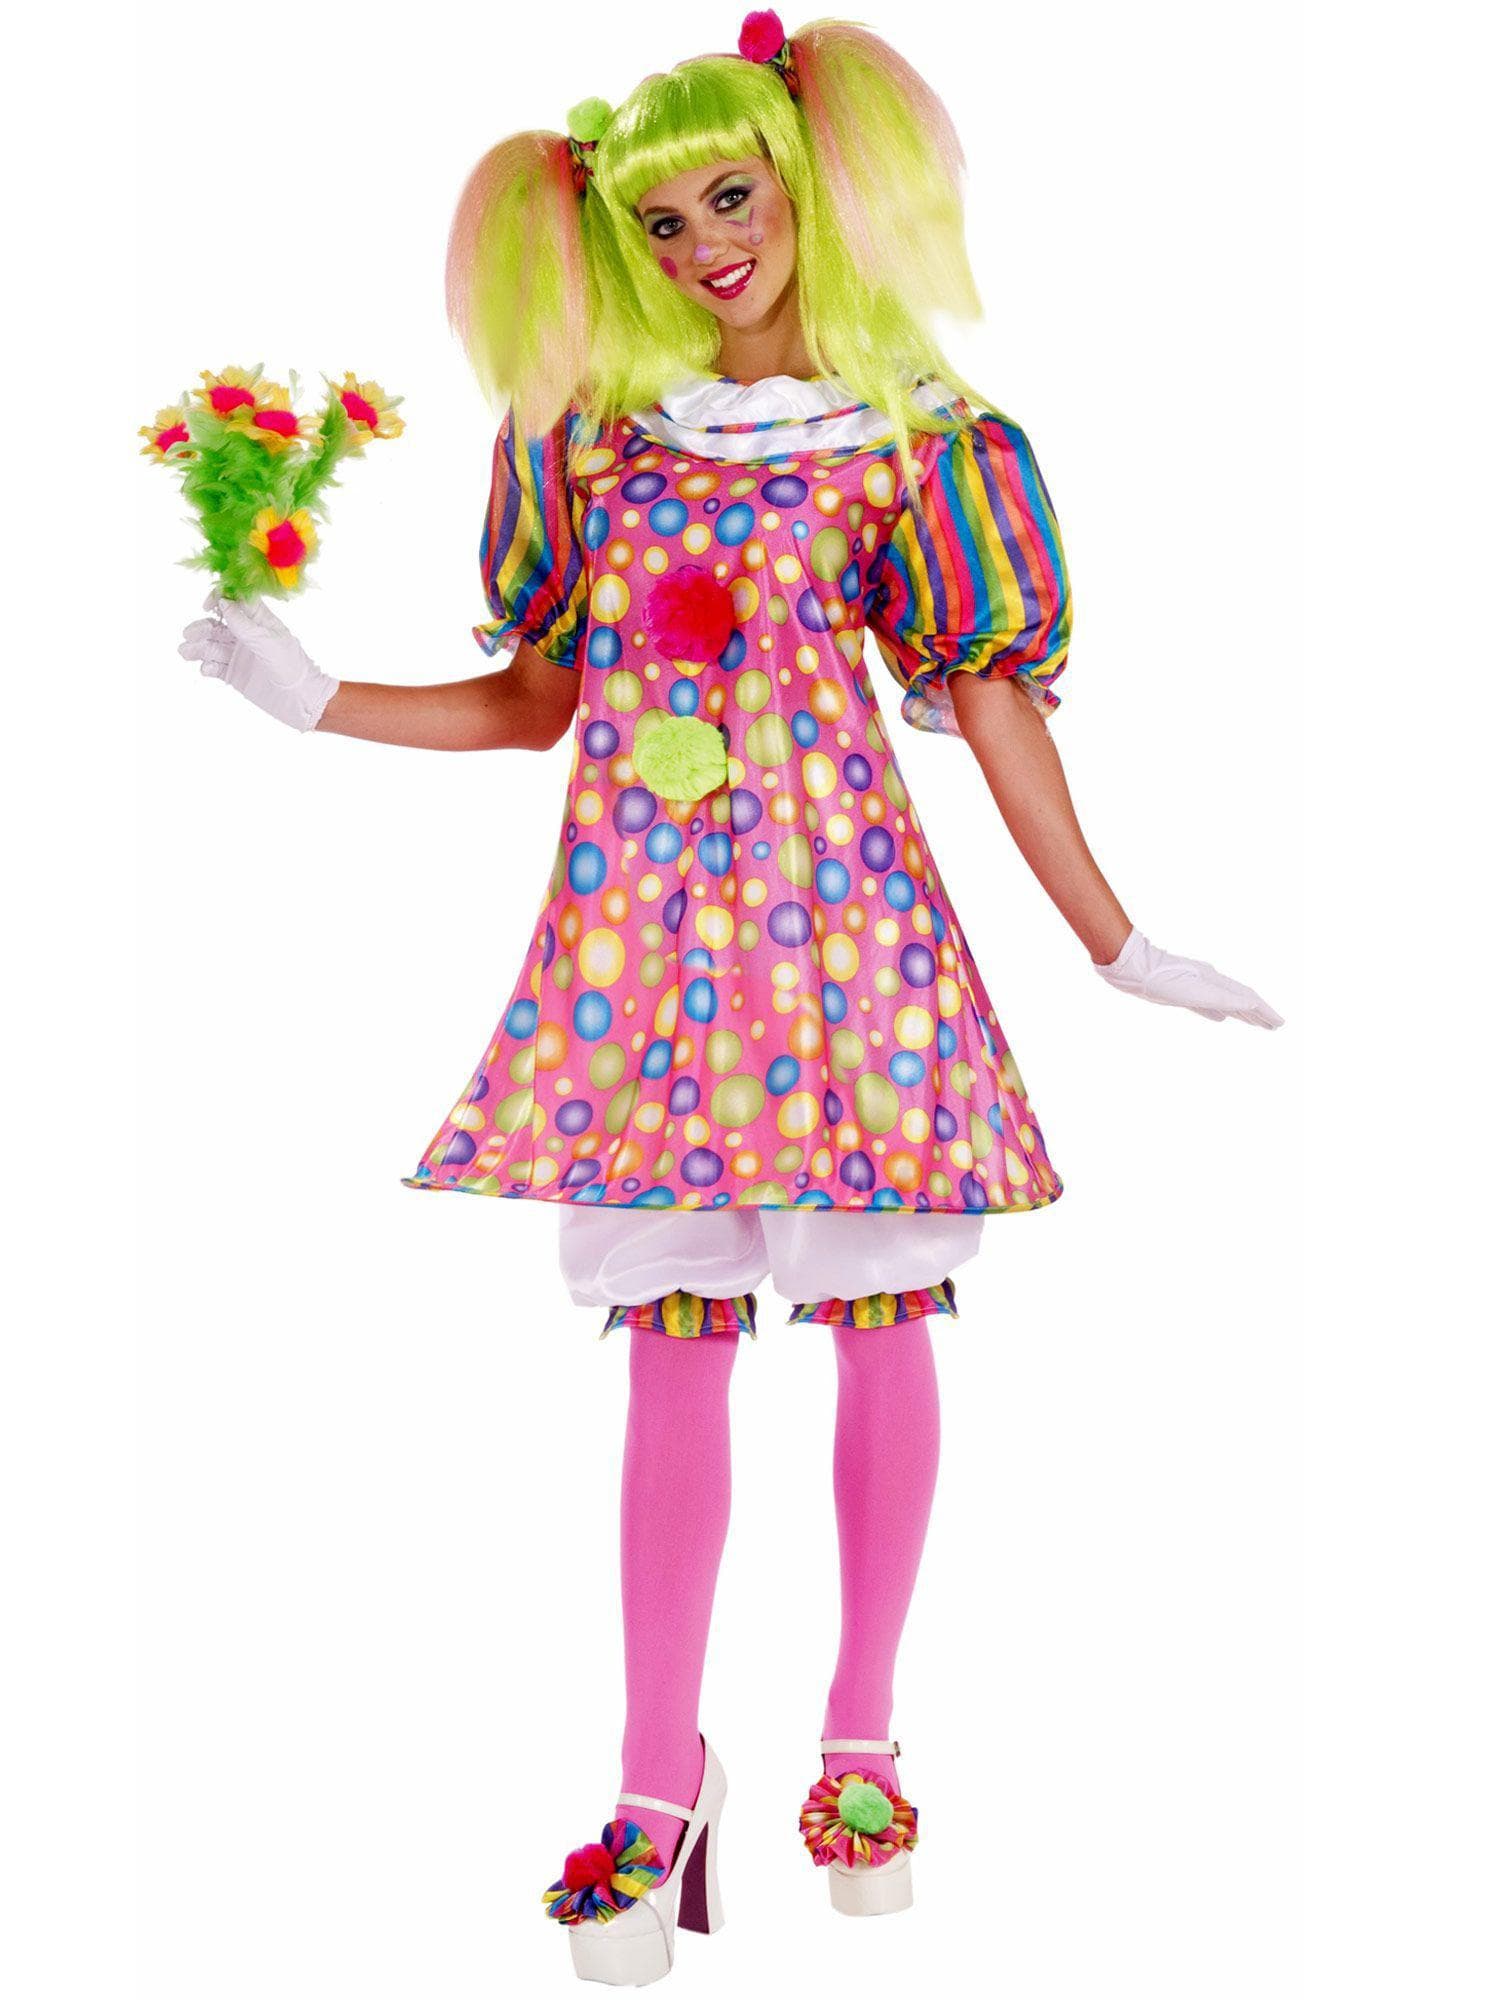 Adult Tickles The Clown Costume - costumes.com